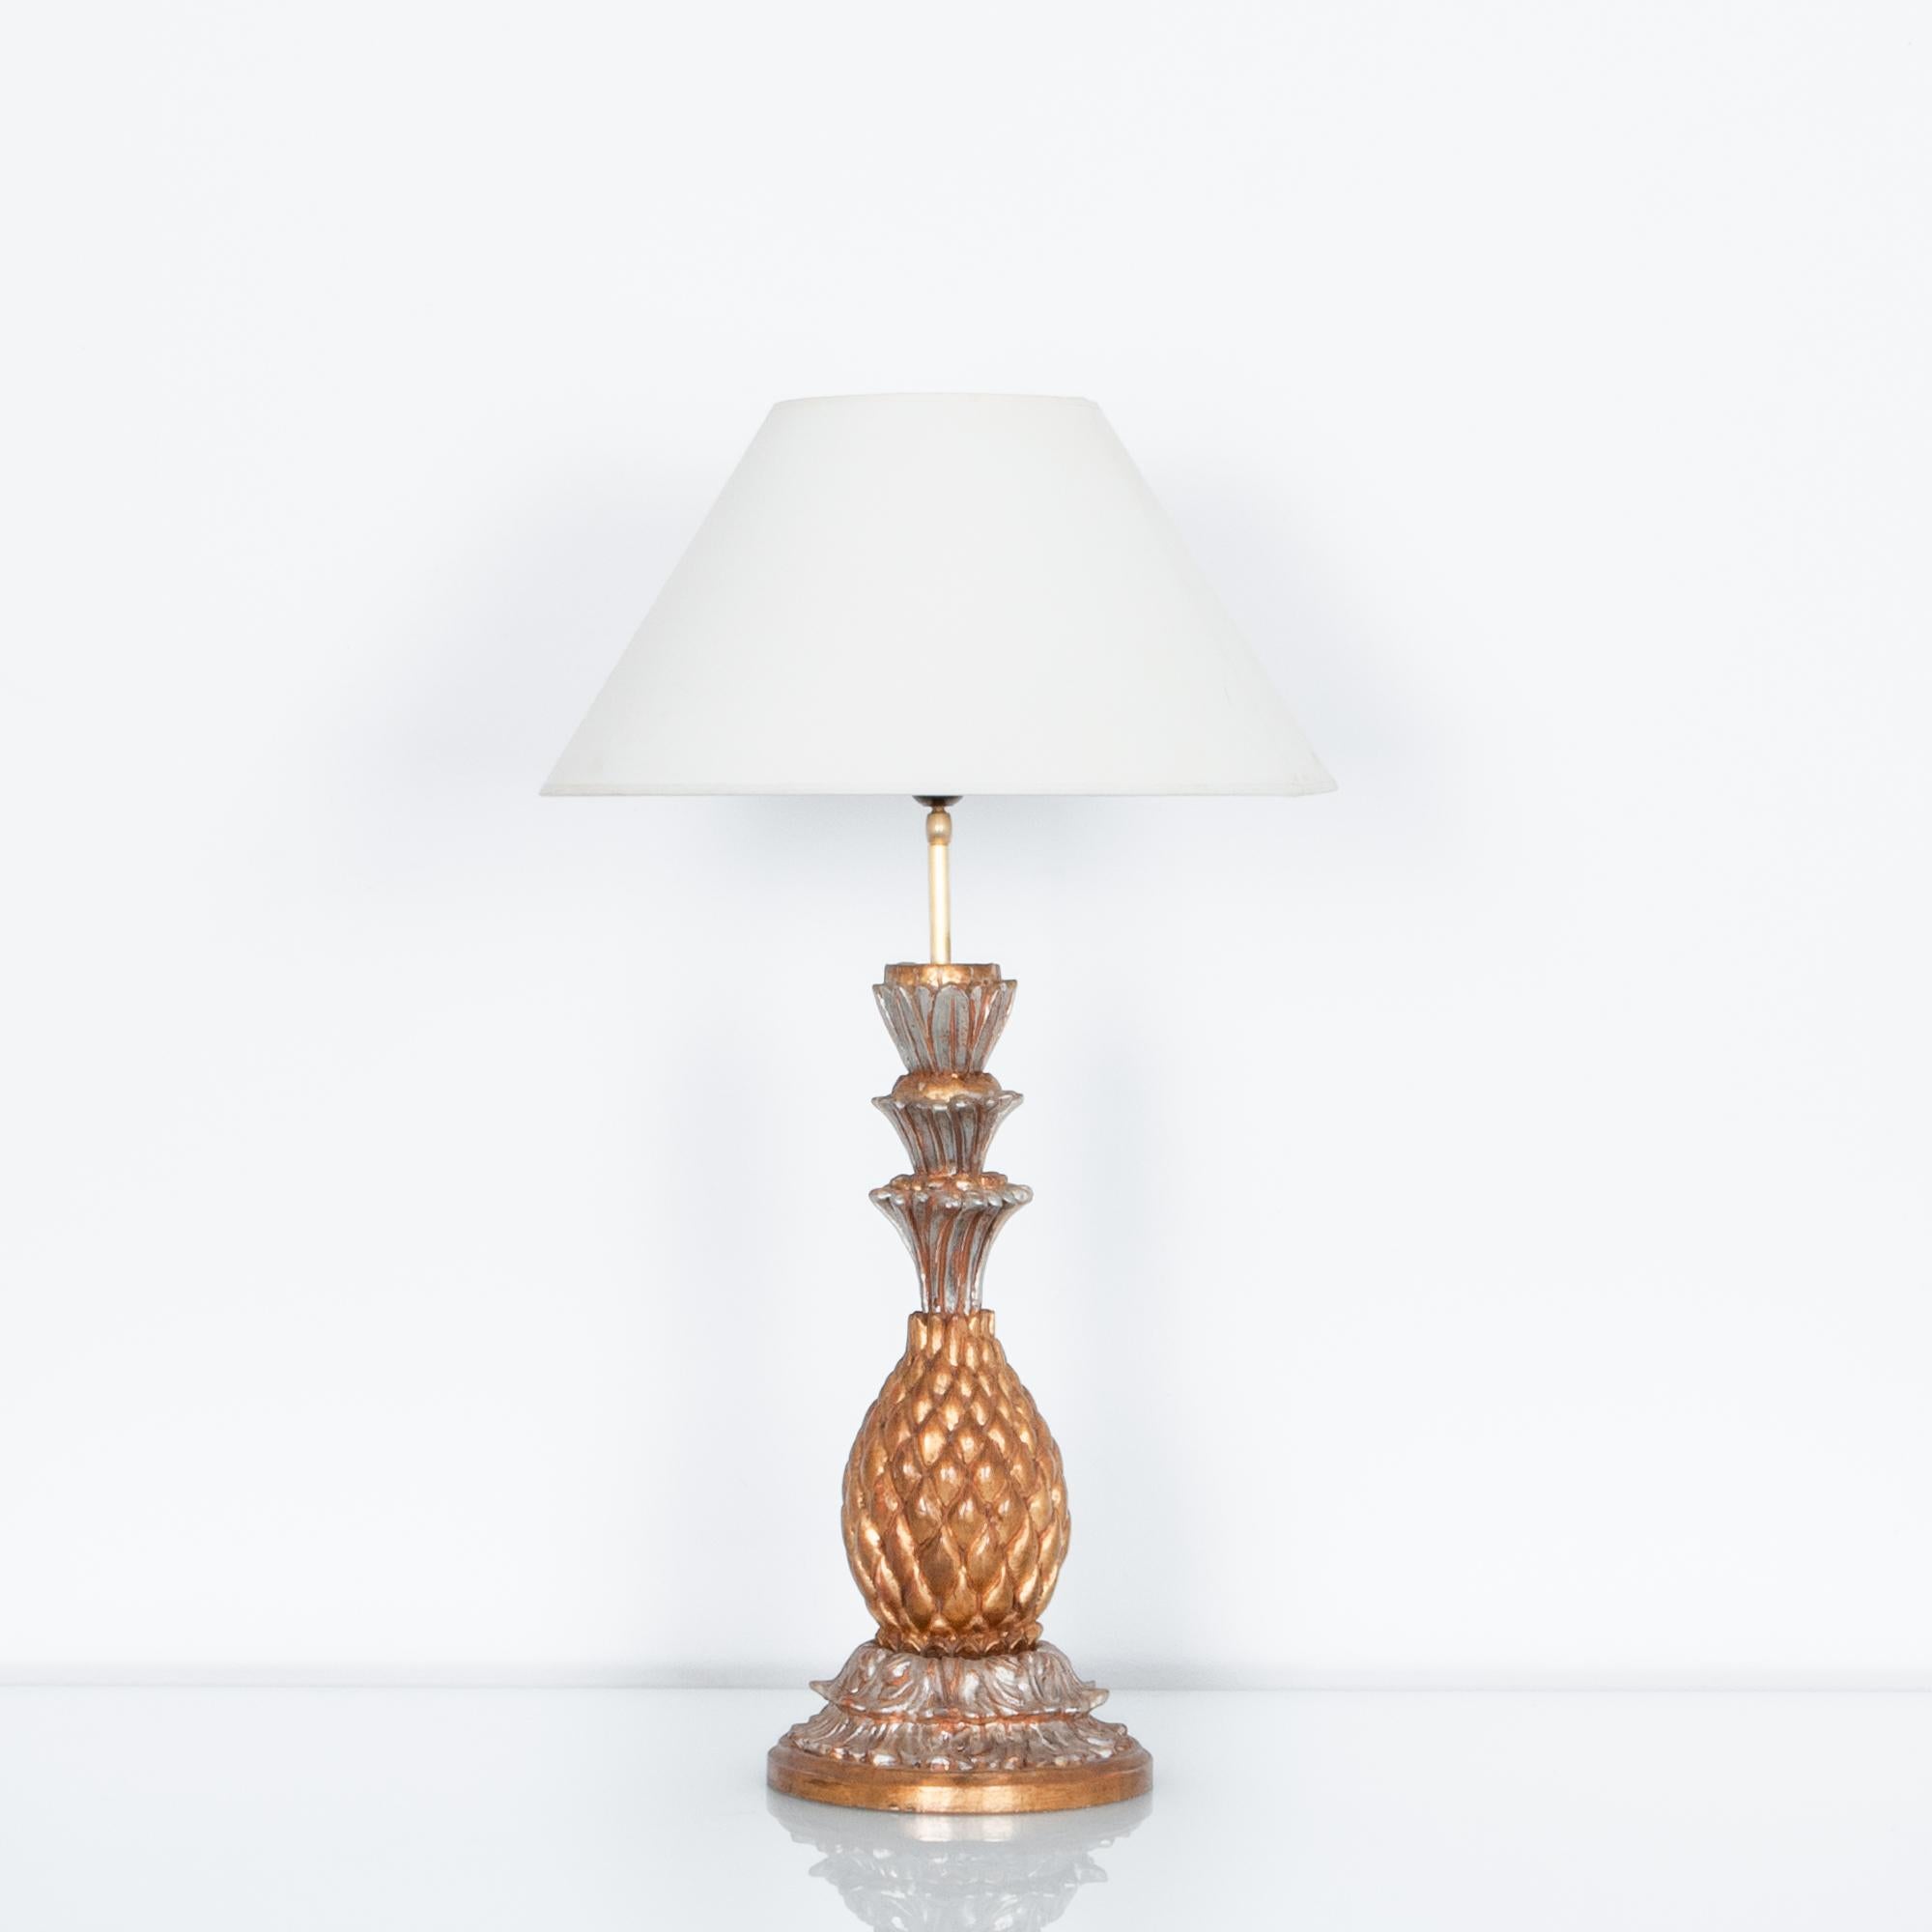 This perishable fruit is a historic symbol of wealth and luxury. This aptly painted 70s French lamp, renders the classic motif in gilded fashion. In a pleasant range of toned gold shades, this wooden lamp has been updated with modern wiring,